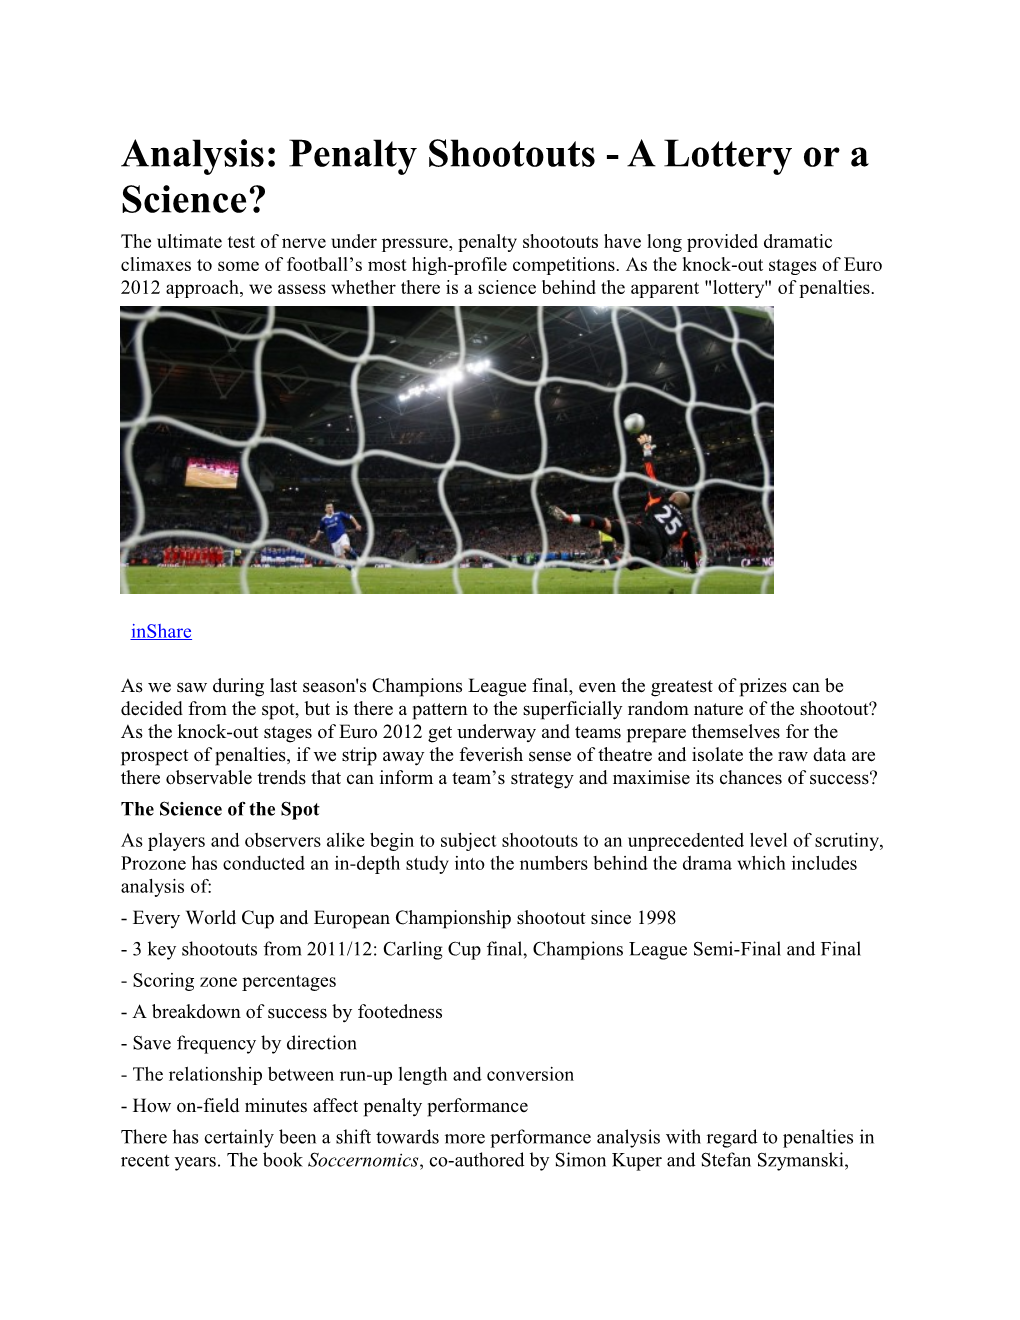 Analysis: Penalty Shootouts - a Lottery Or a Science?